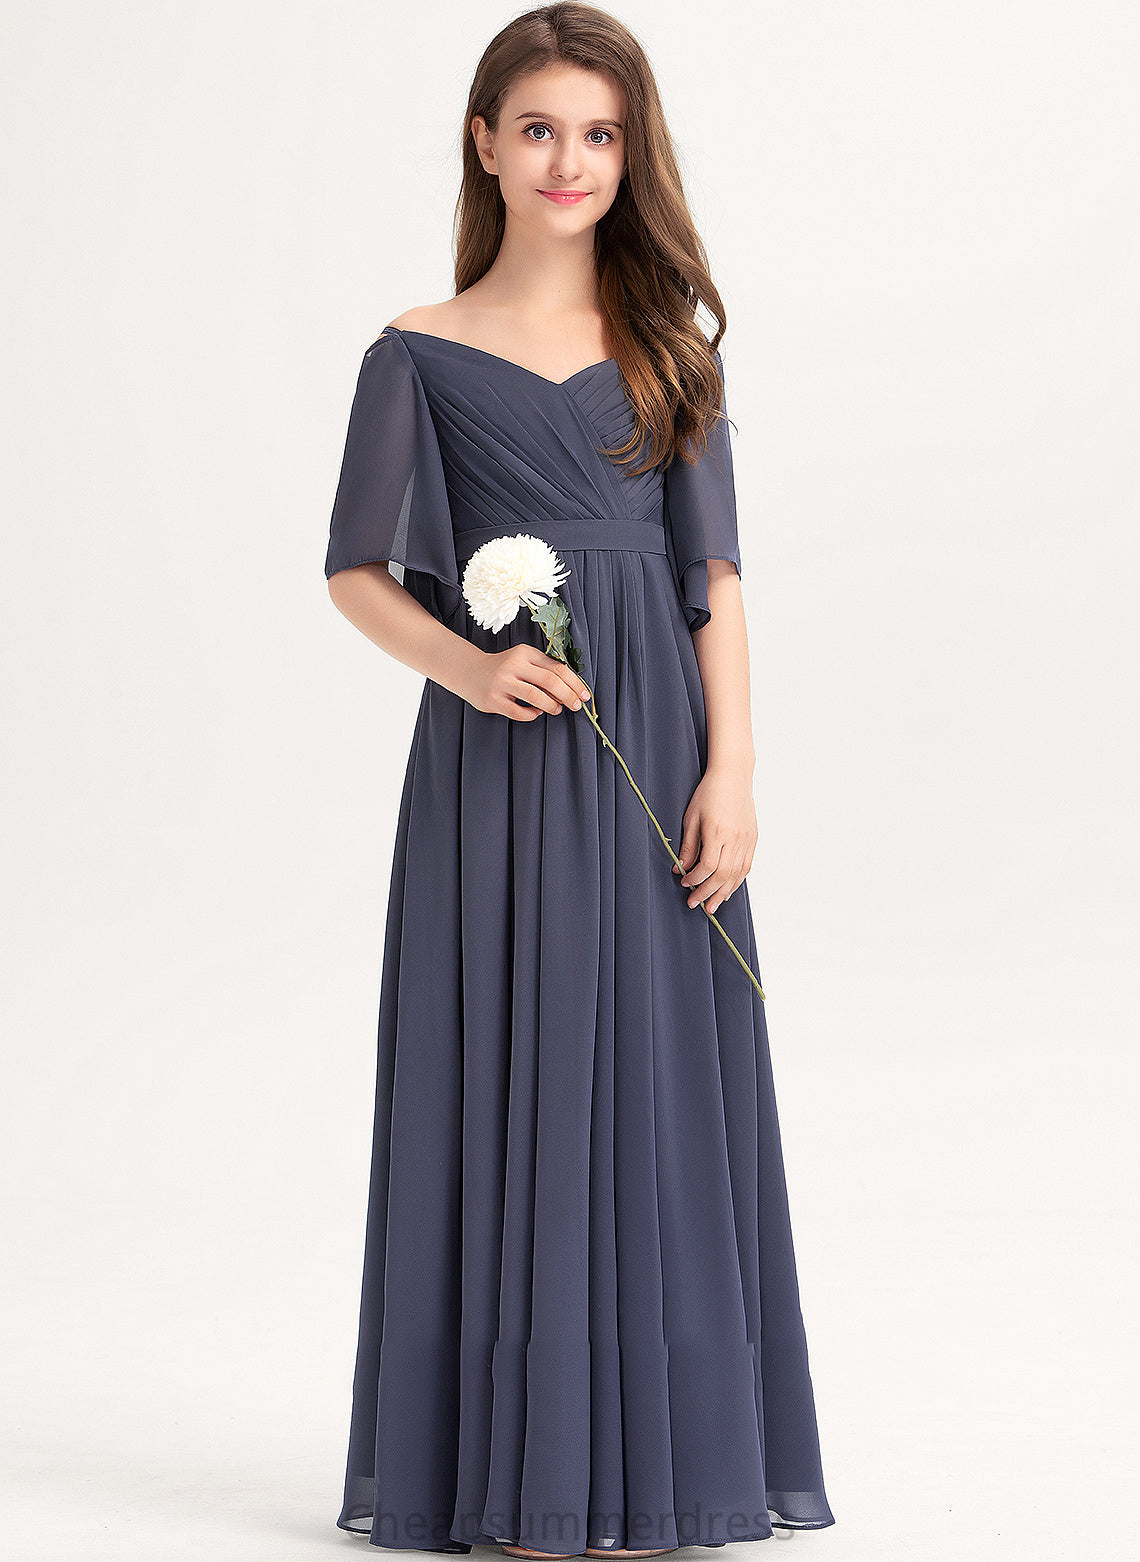 Floor-Length Bow(s) Vanessa Chiffon Ruffle Junior Bridesmaid Dresses A-Line With Off-the-Shoulder